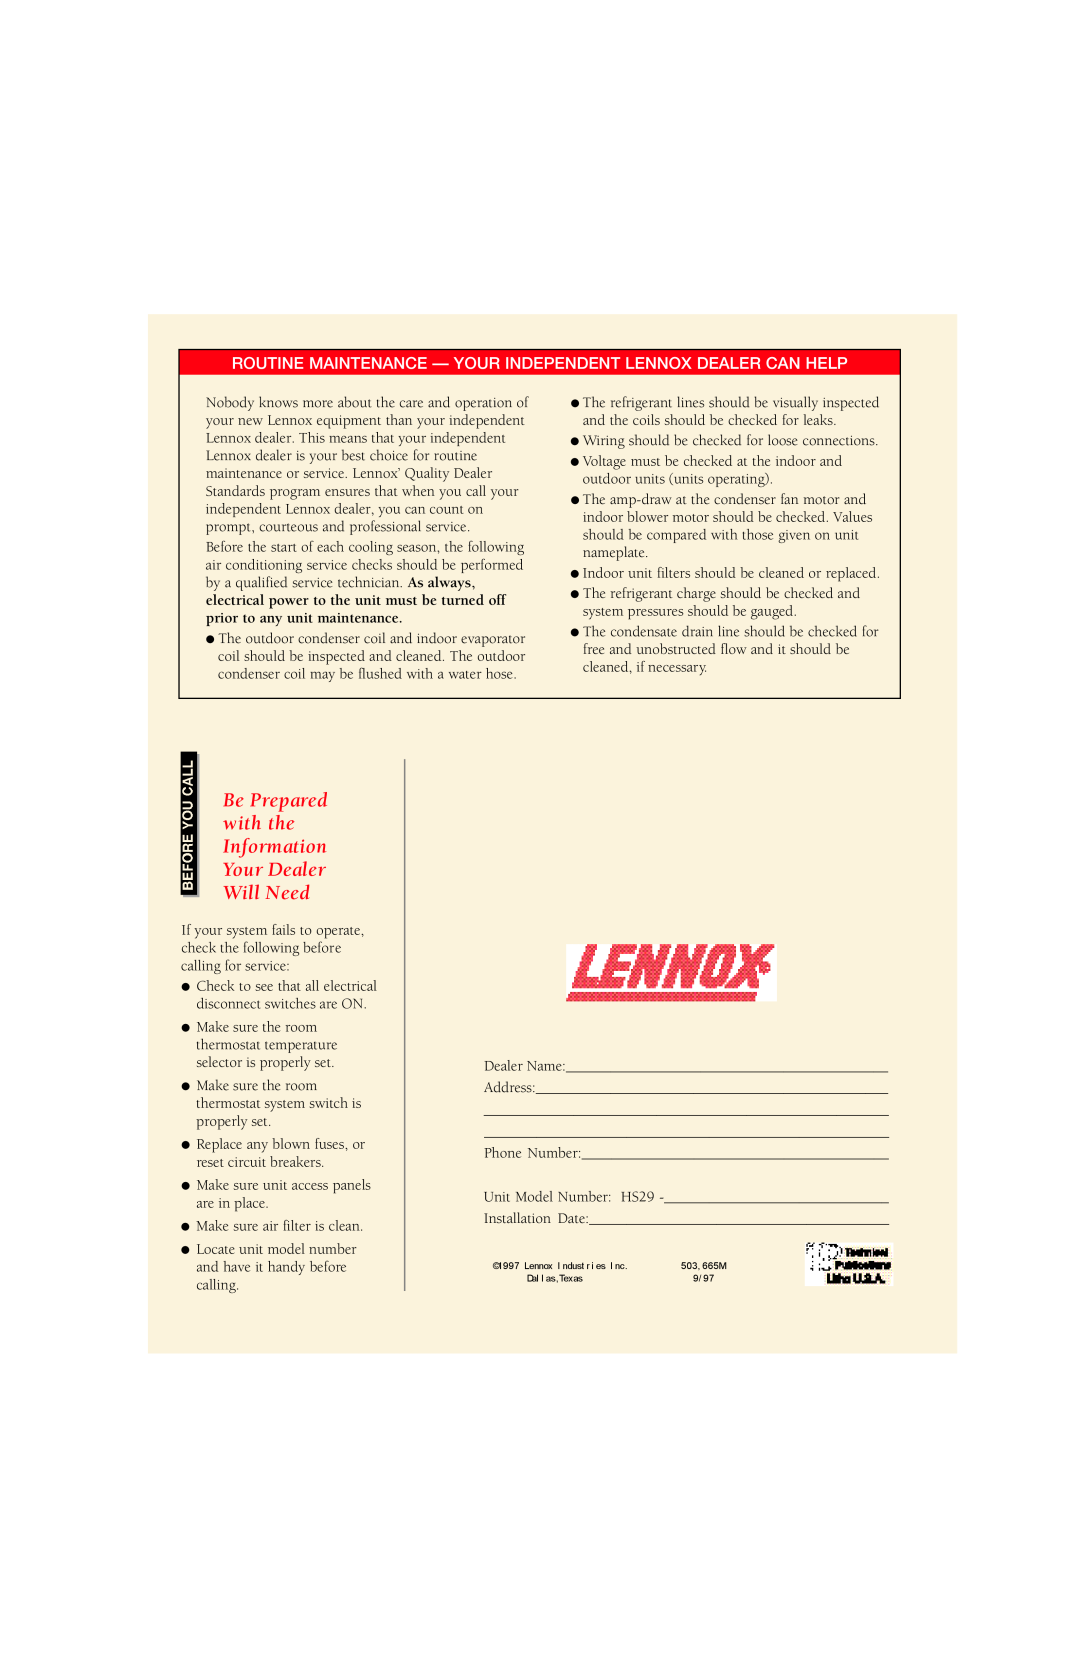 Lennox International Inc 11 owner manual Wiring should be checked for loose connections 